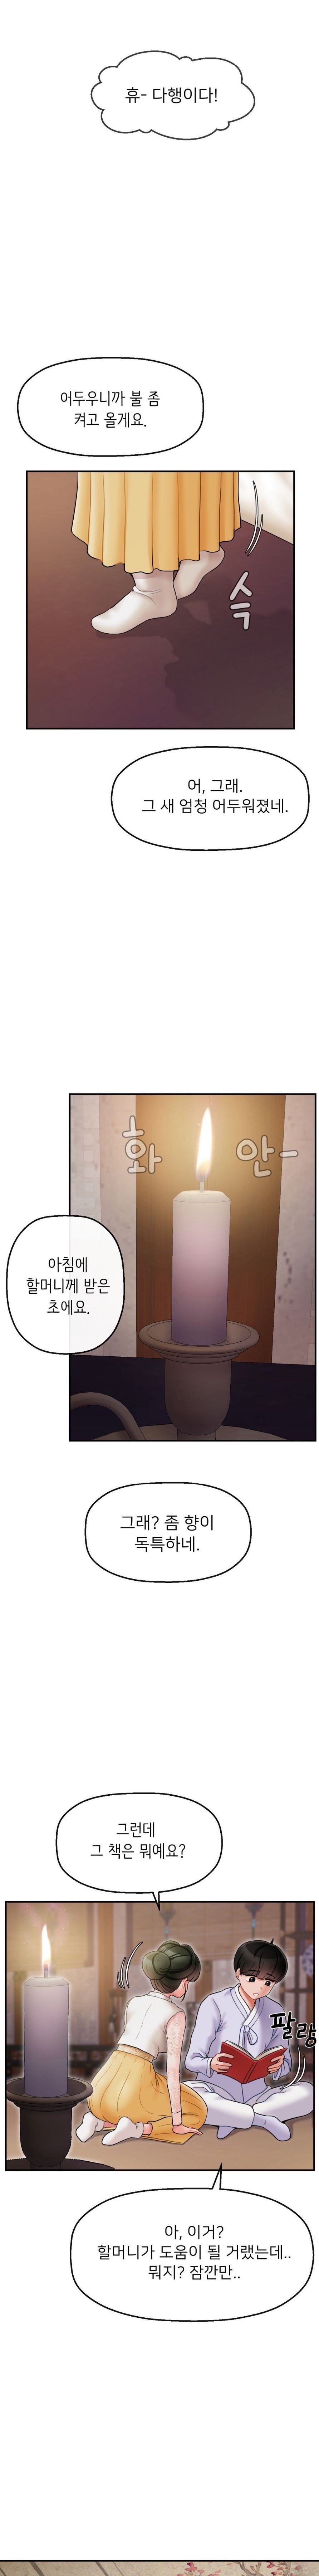 seventeenth-only-son-raw-chap-3-18